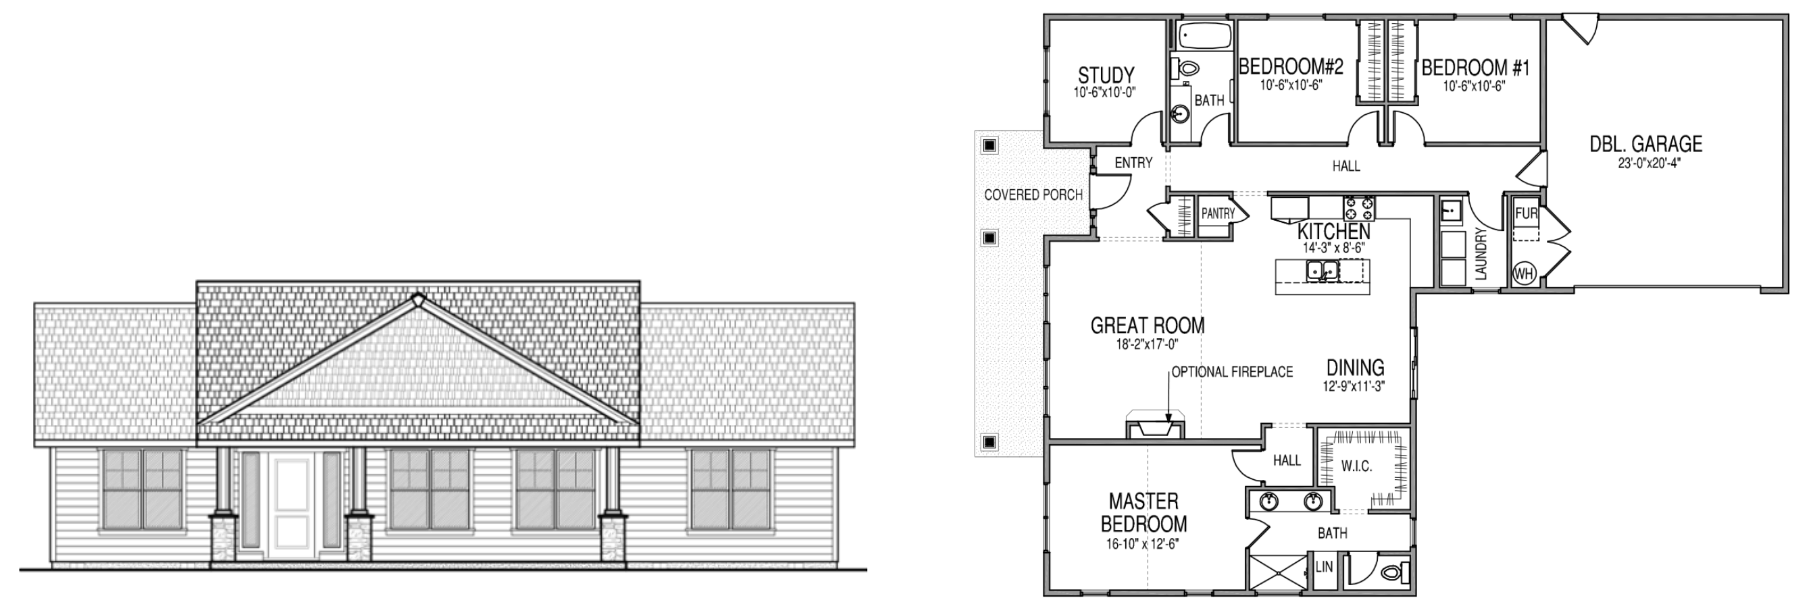 Madison single story home floor plan with a master bedroom with a walk in closet and bathroom, 2 additional bedrooms, another bathroom, a great room, dining space, kitchen, pantry, laundry room, study, double garage, and a covered porch and patio